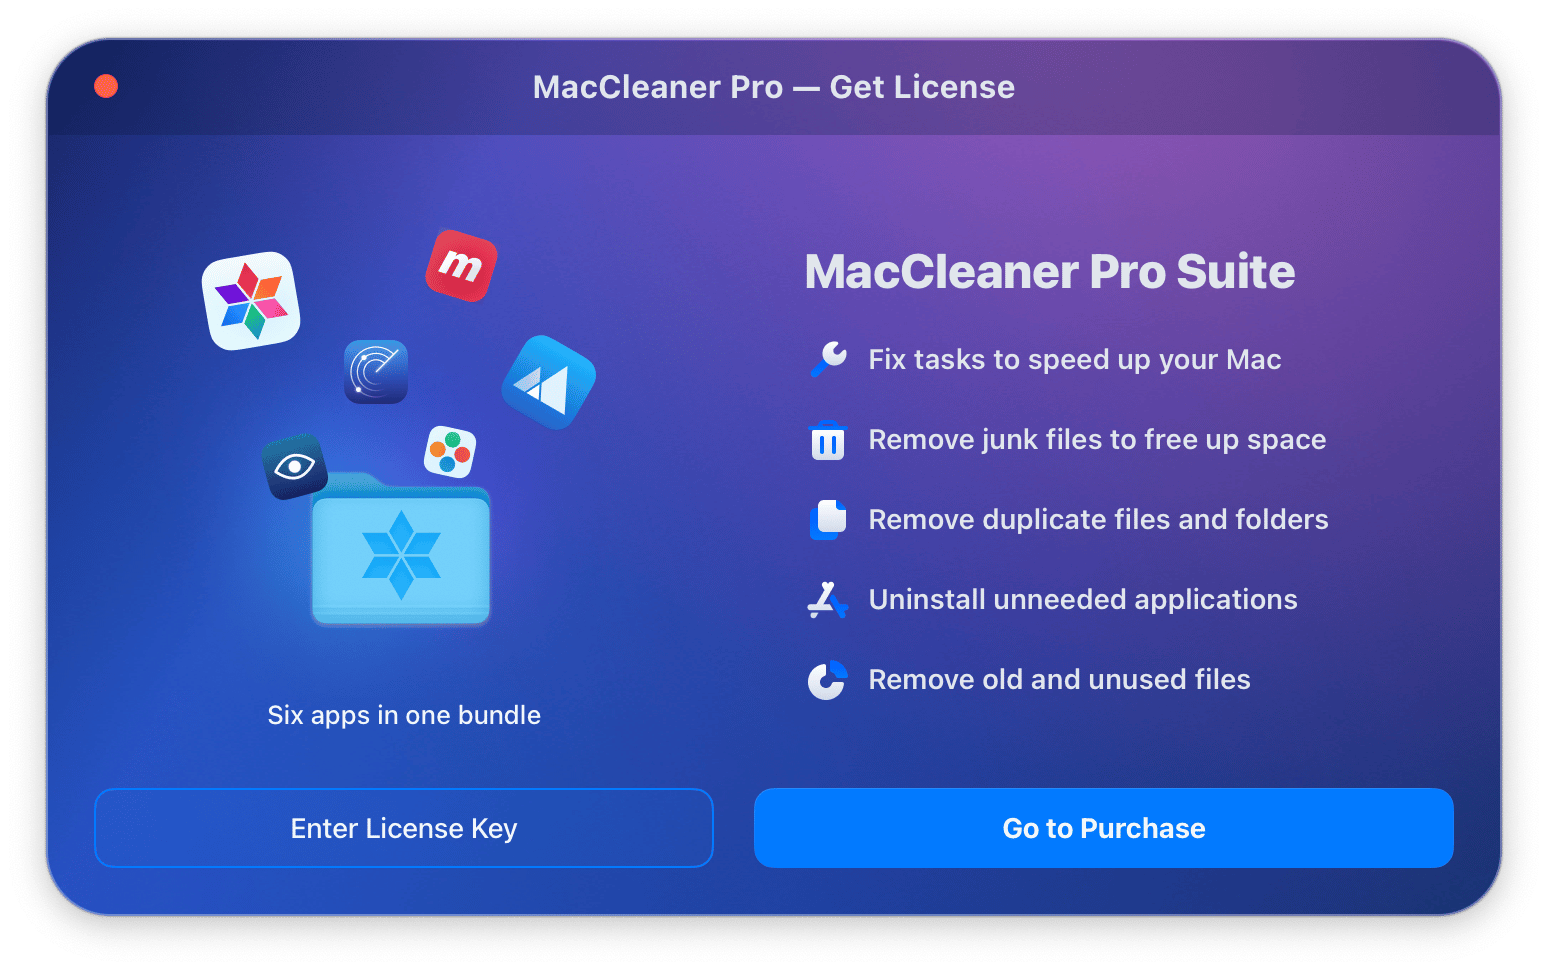 getting license popup for MacCleaner Pro